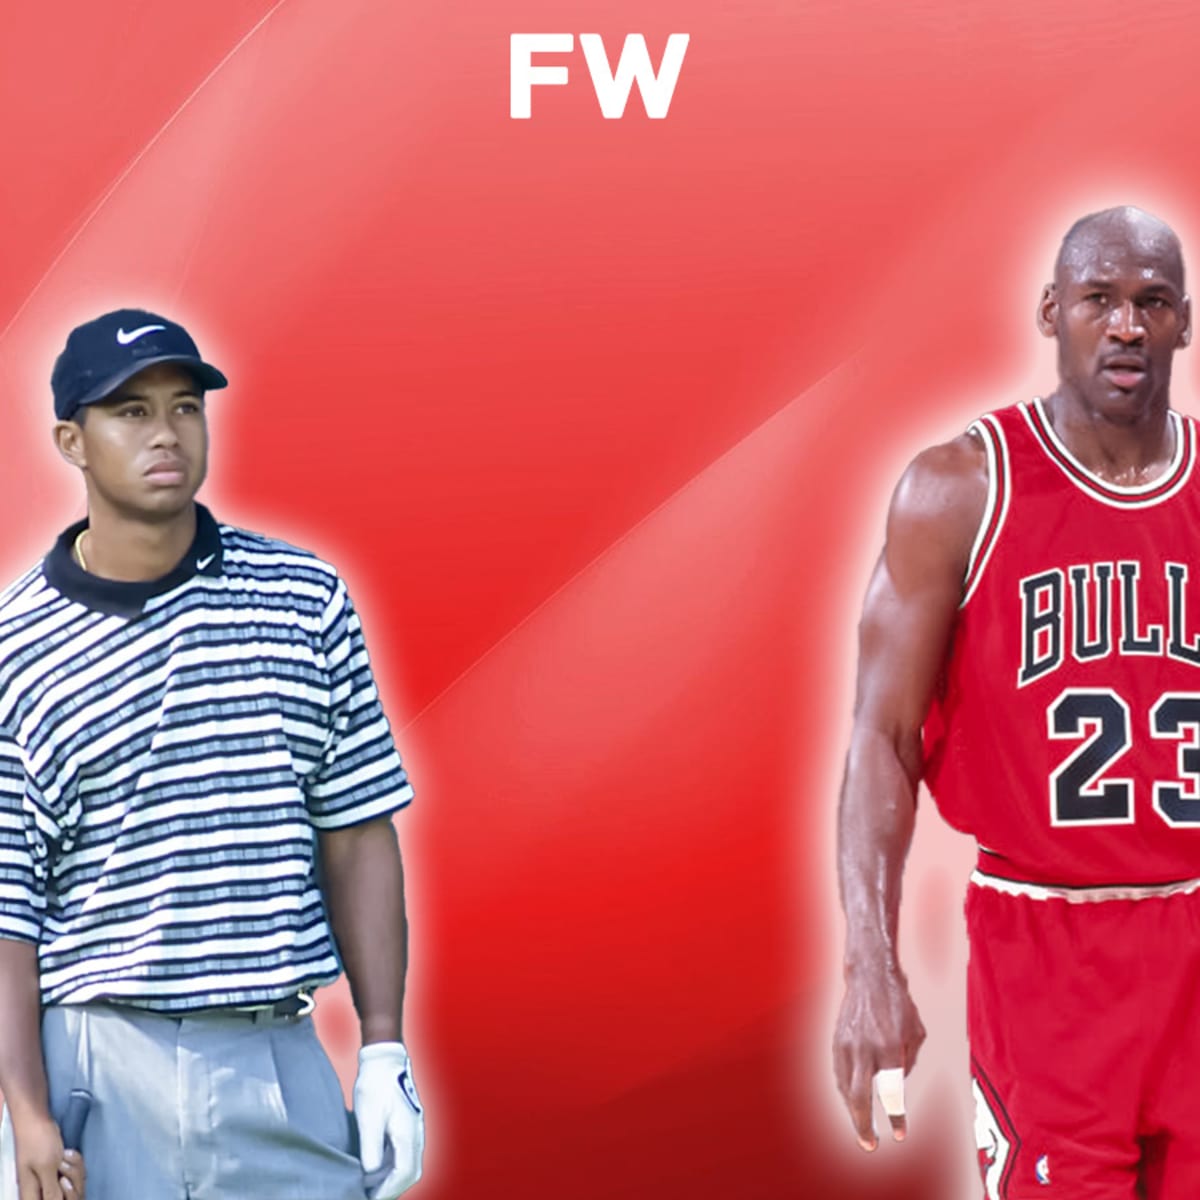 From the hardwood to the fairway, Michael Jordan has influenced a